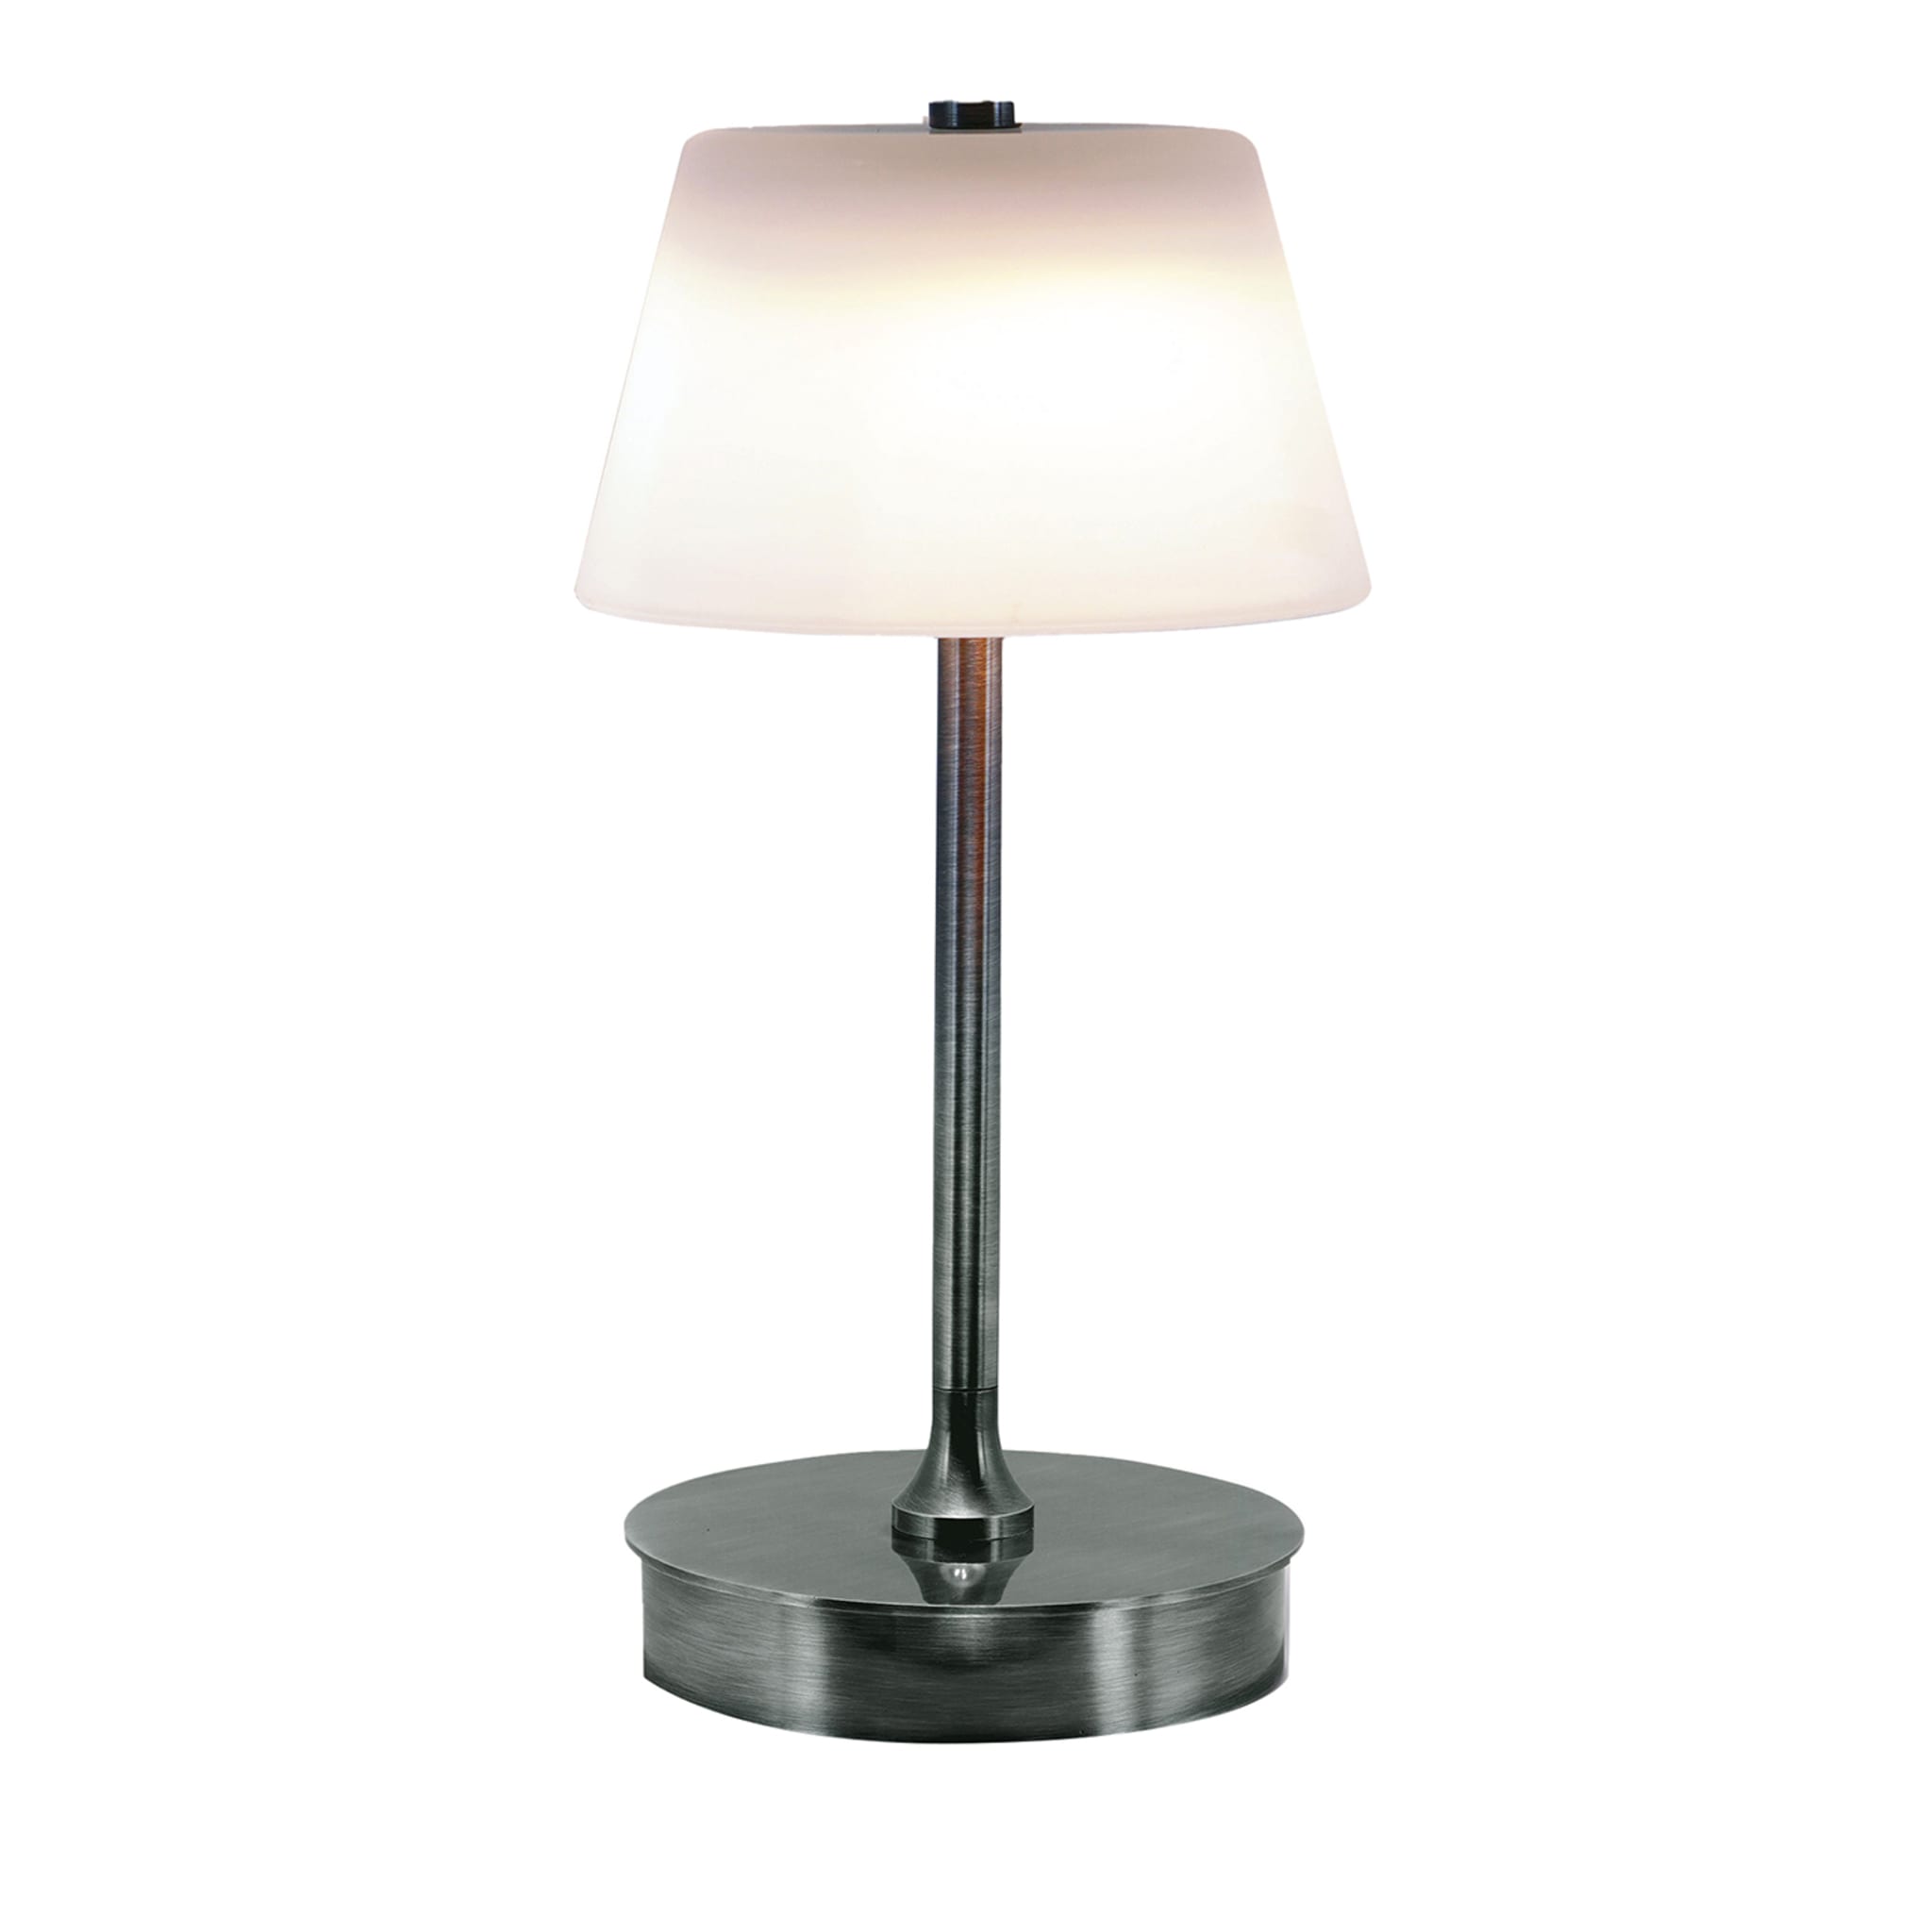 Lumetto Pewter Table Lamp by Stefano Tabarin - Main view